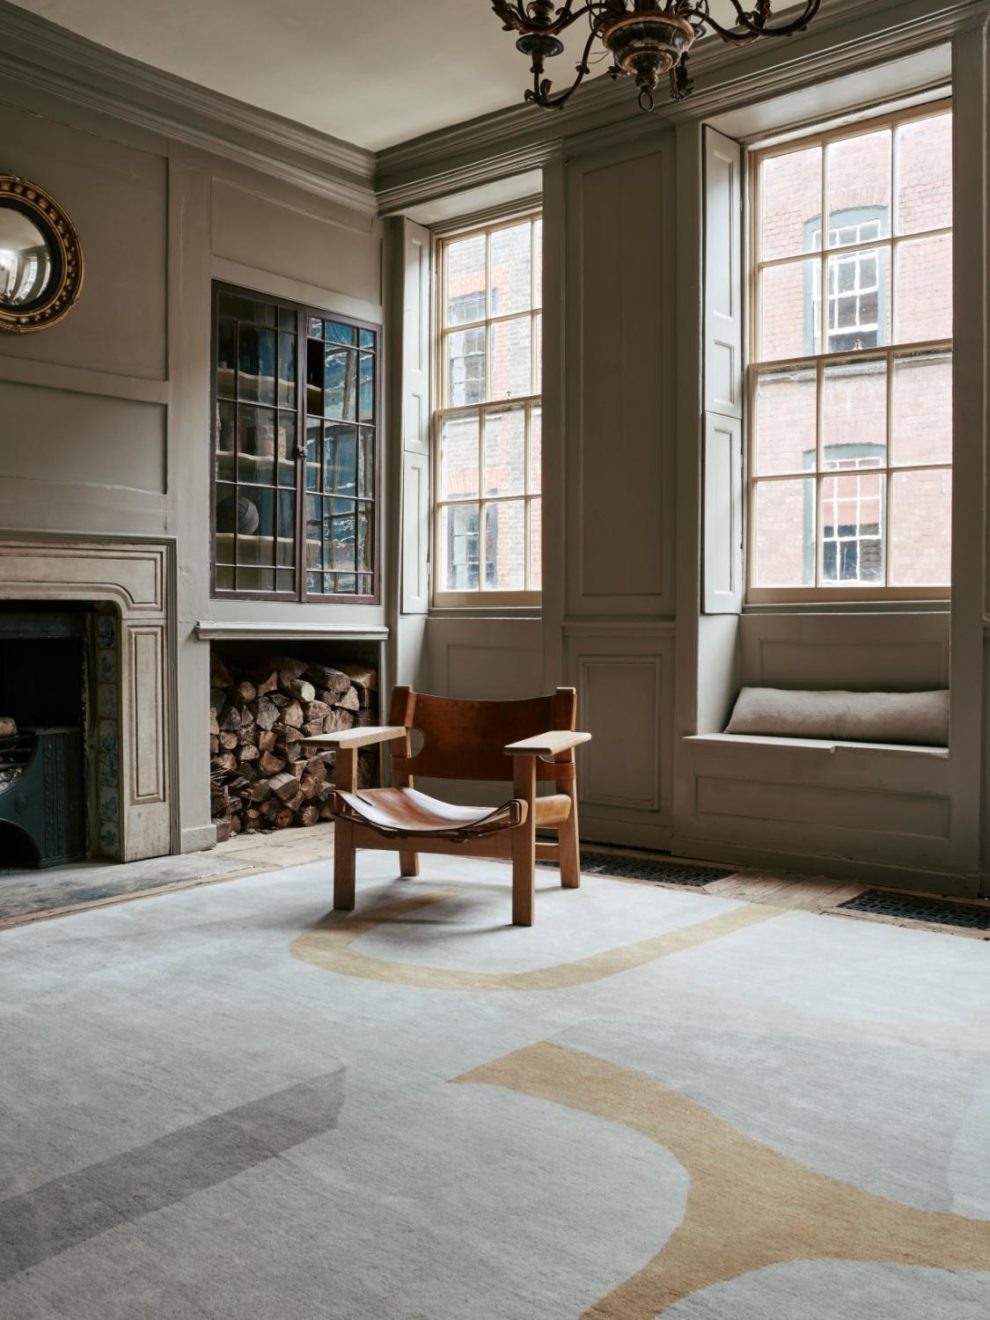 Christopher Farr - Close - Photograph by Christopher Horwood - Christopher Farr Rugs - Aucoot Estate Agents - Design Directory